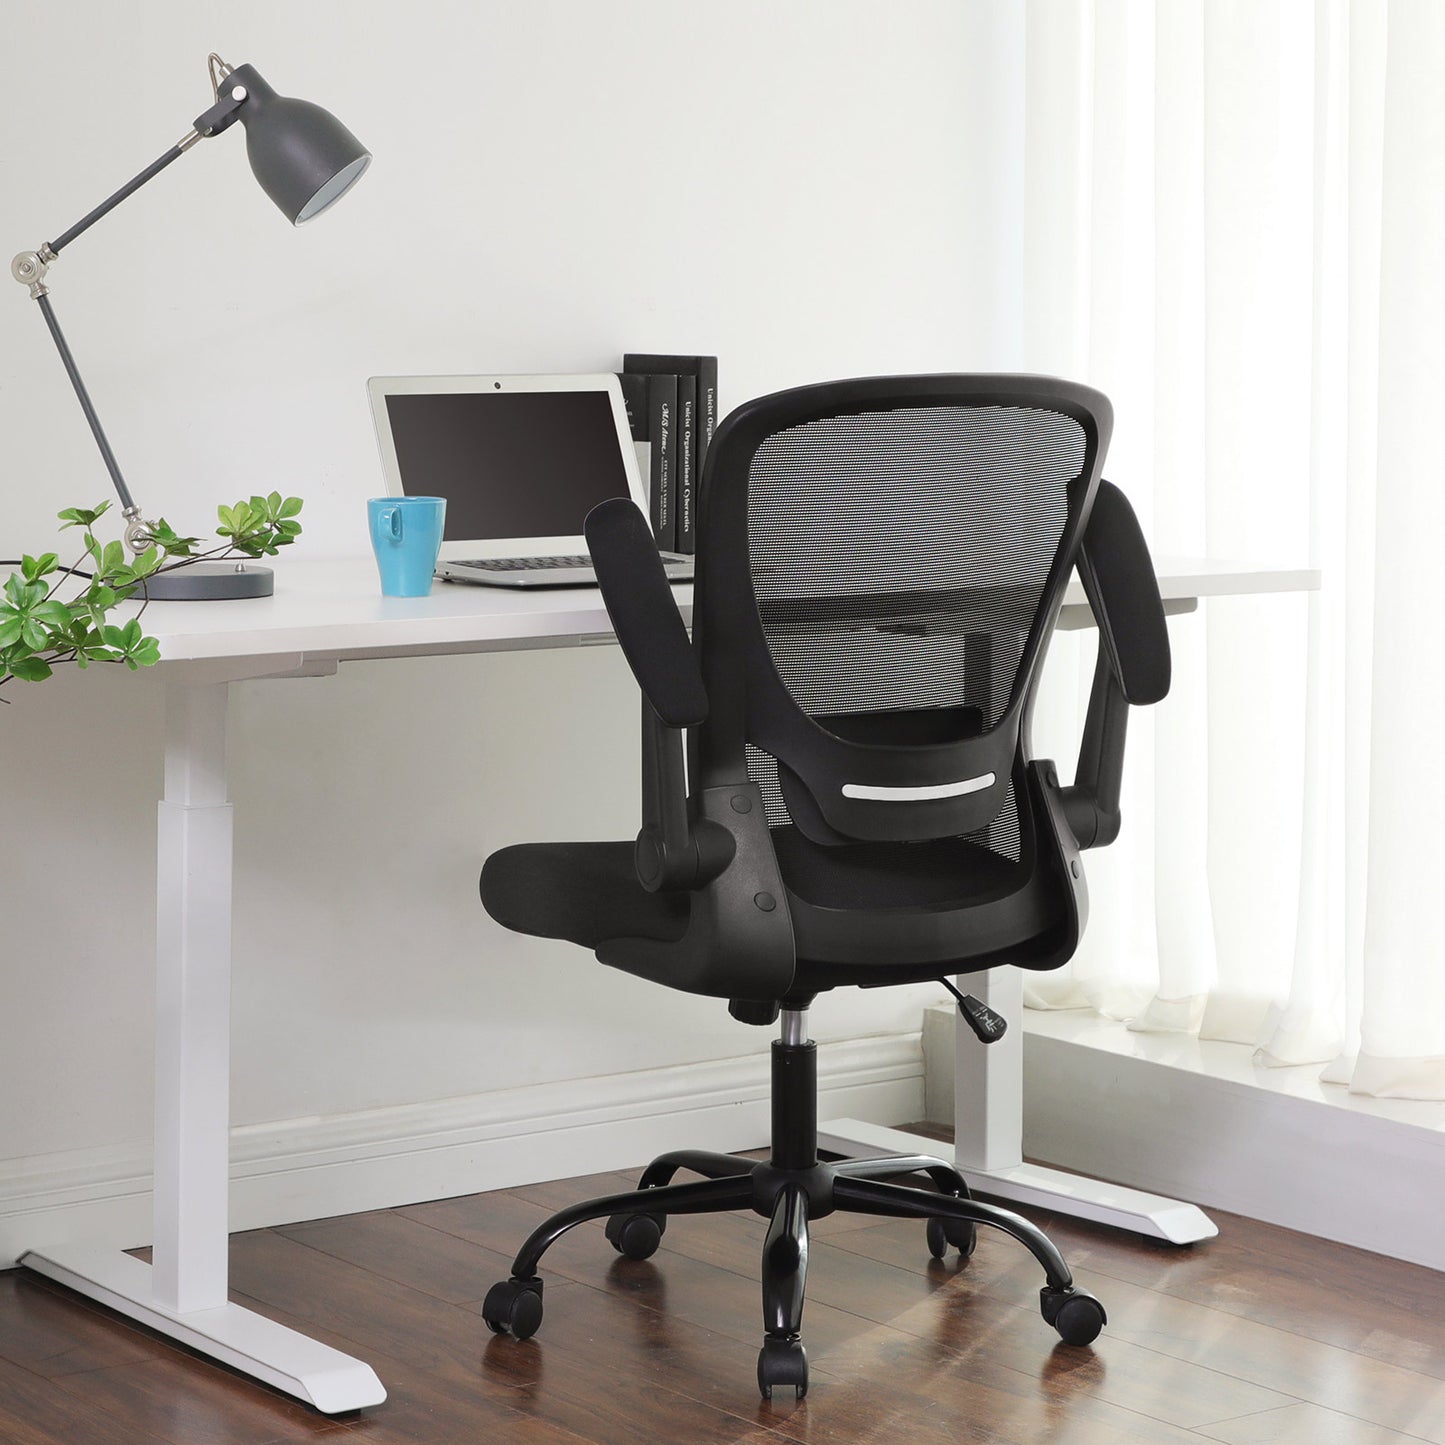 Office chair with foldable armrests